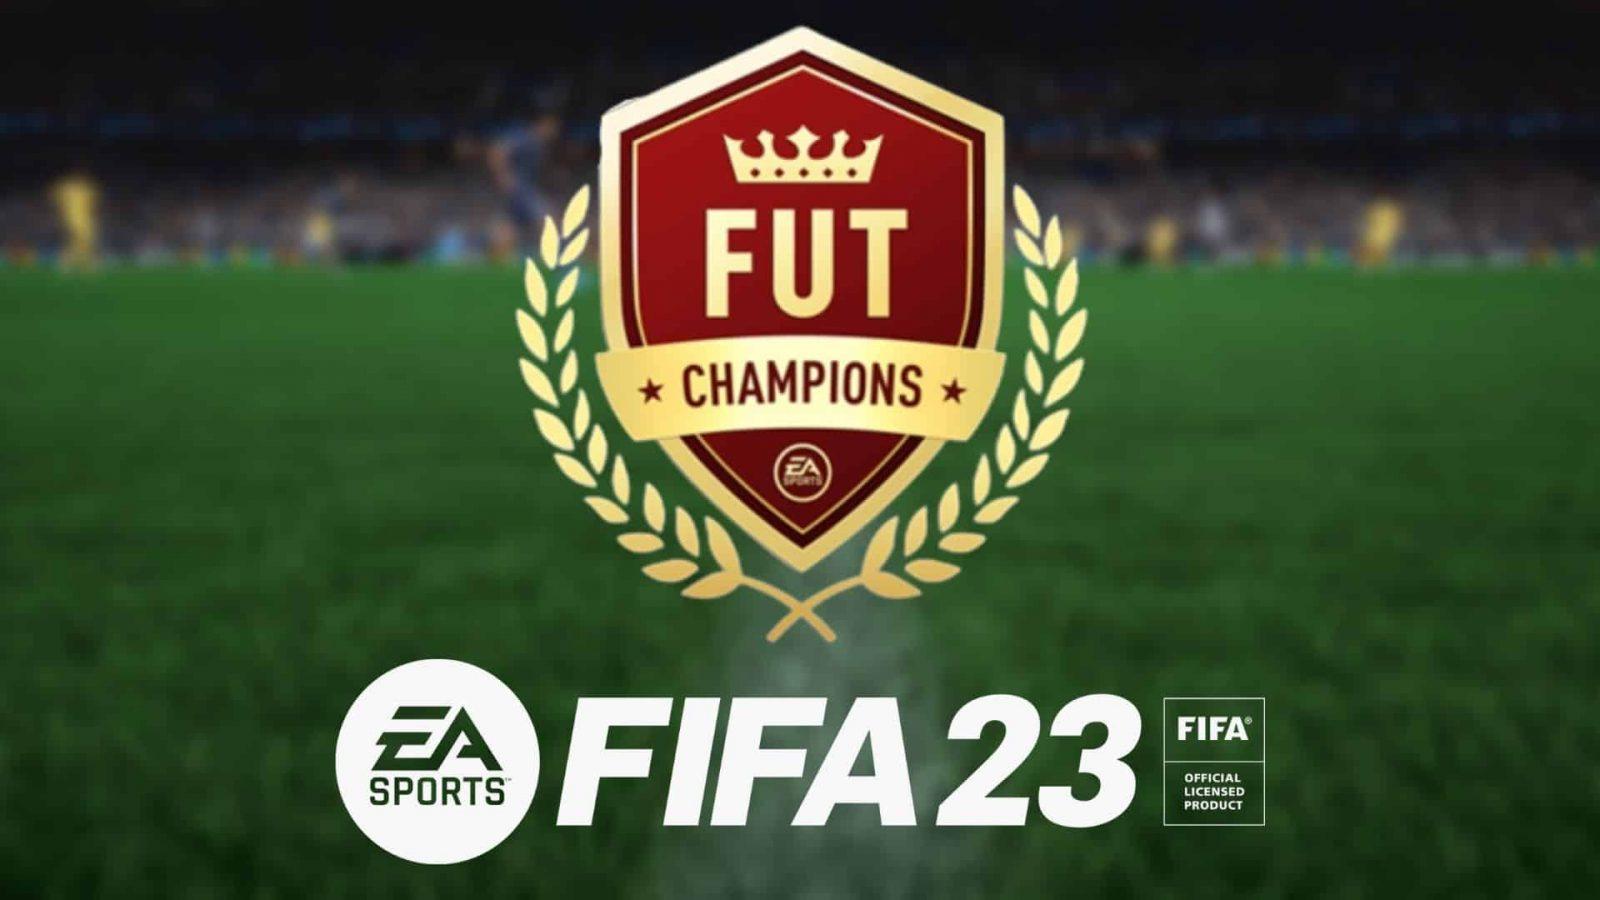 Will FIFA 23 ever go lower than this ? This promotional offer is